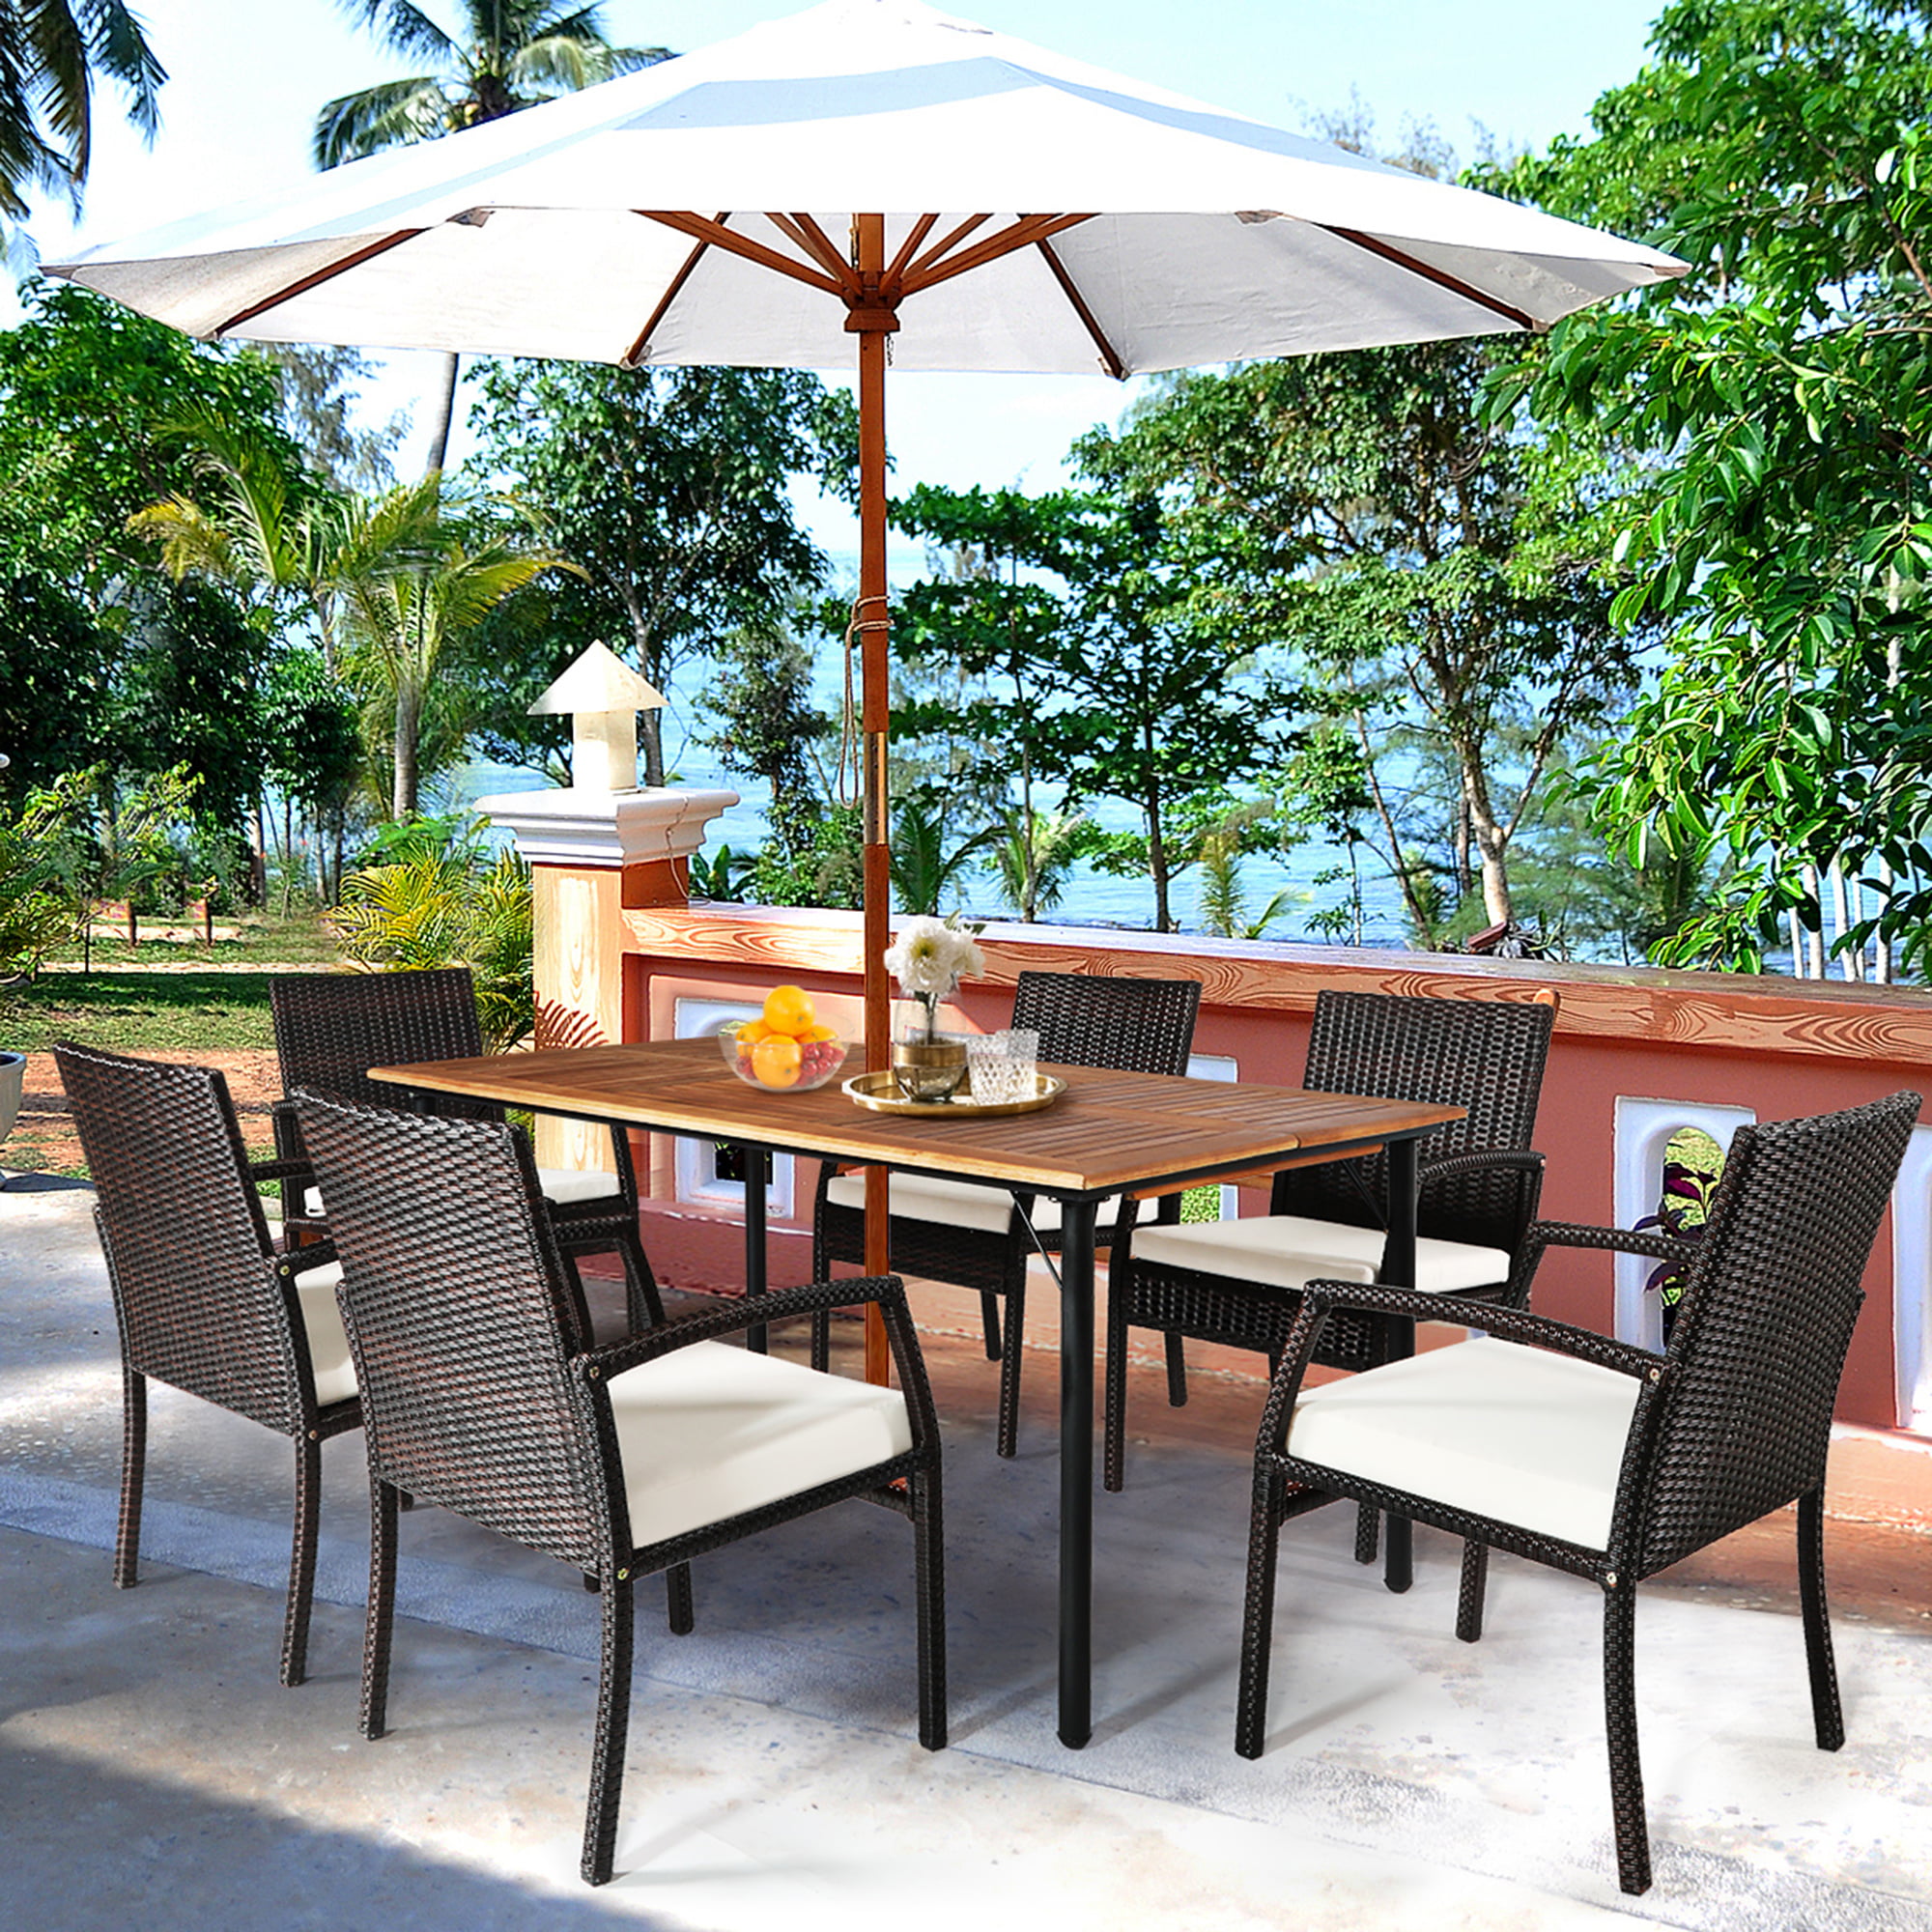 Gymax 7pcs Patio Dining Furniture Set W, Patio Dining Table With Umbrella Hole Canada